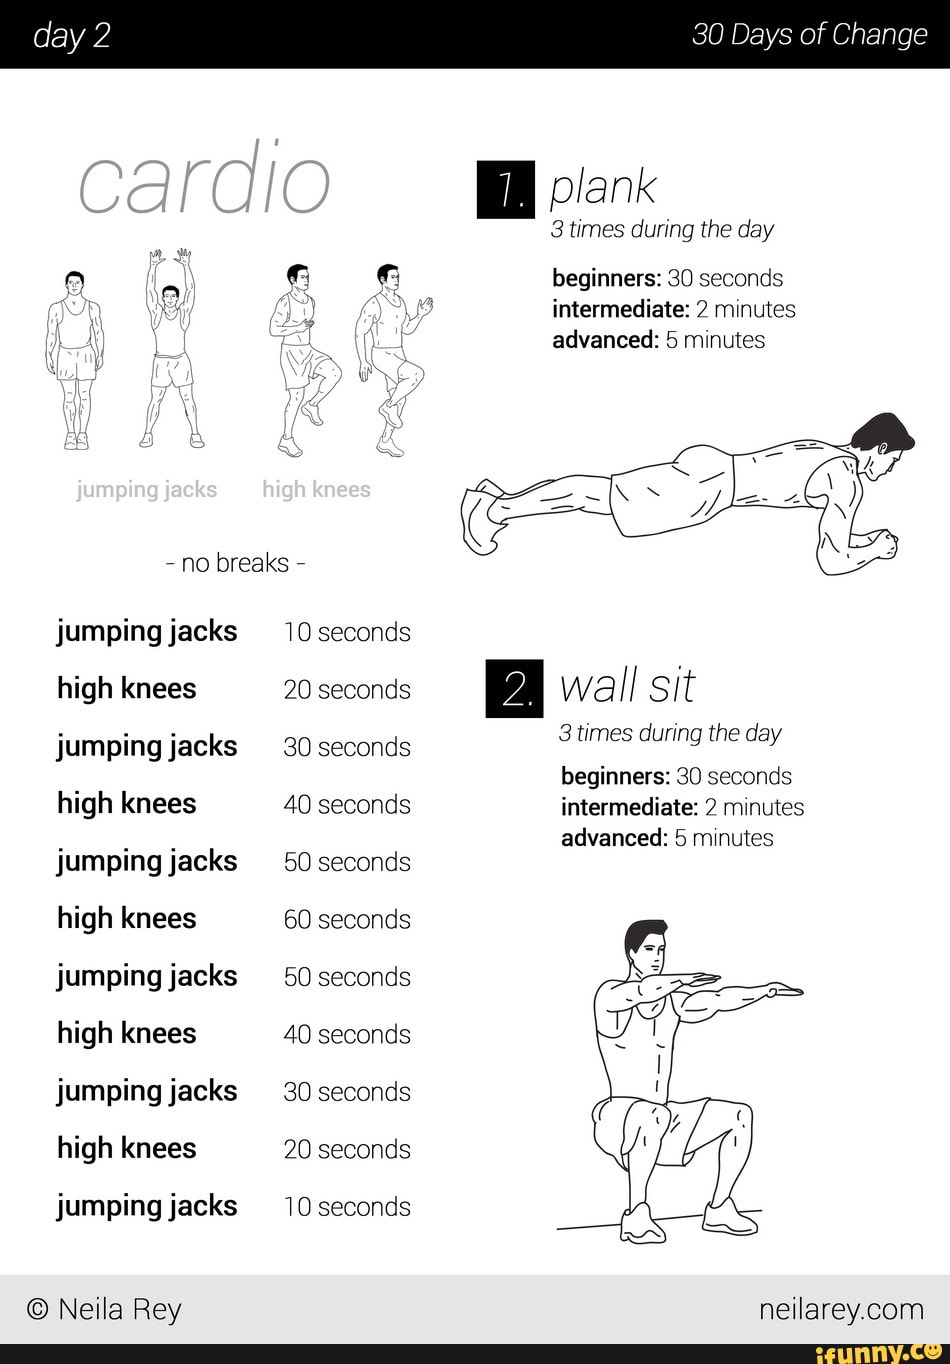 No equipment 30 day workout program - - day plank 30 Days of